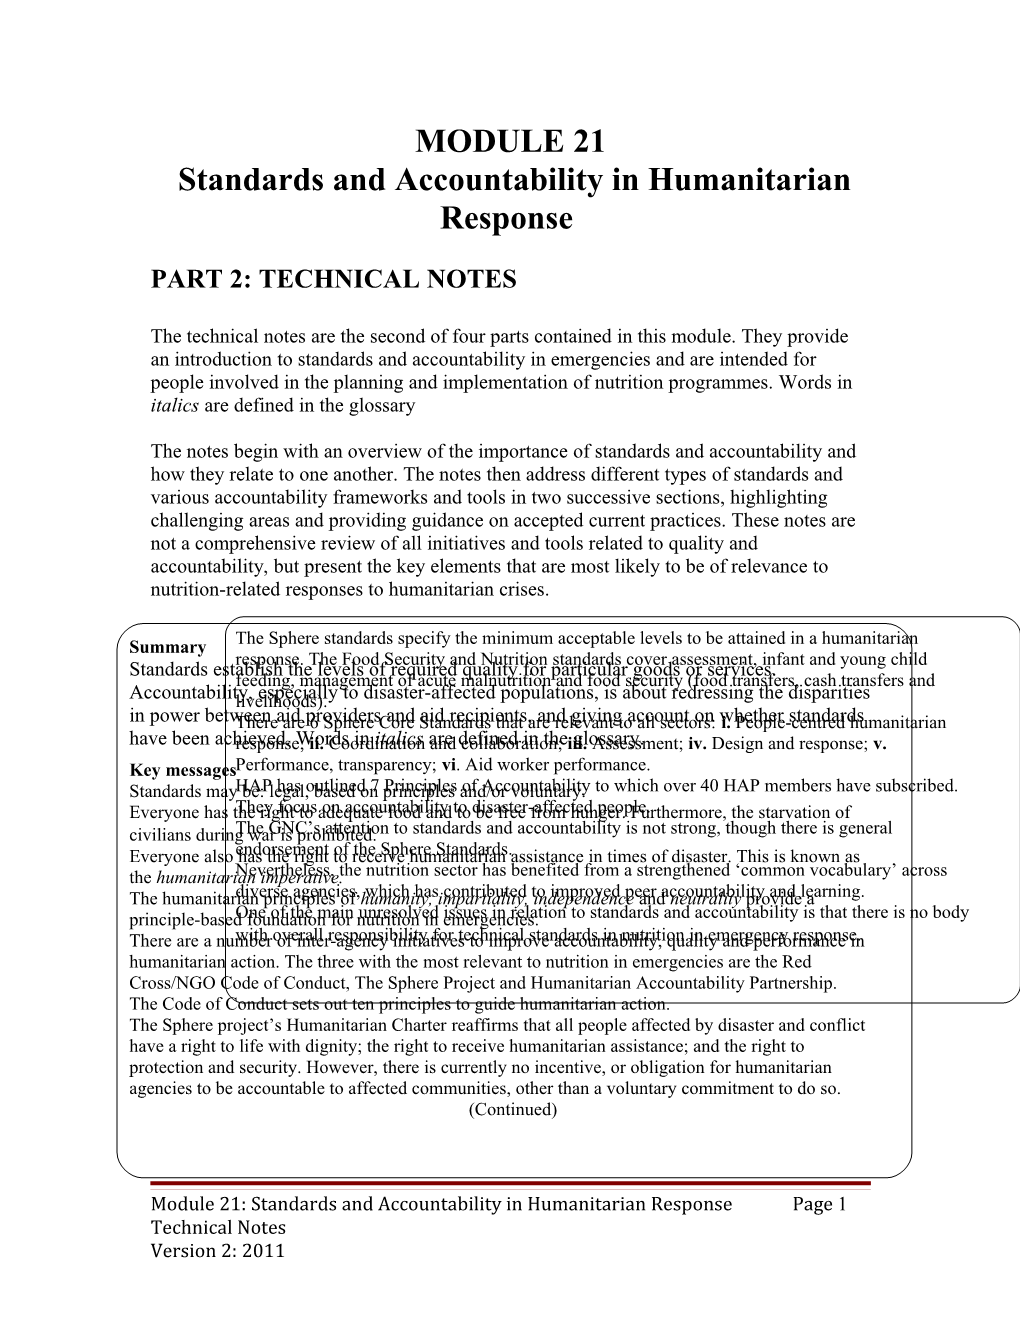 Standards and Accountability in Humanitarian Response